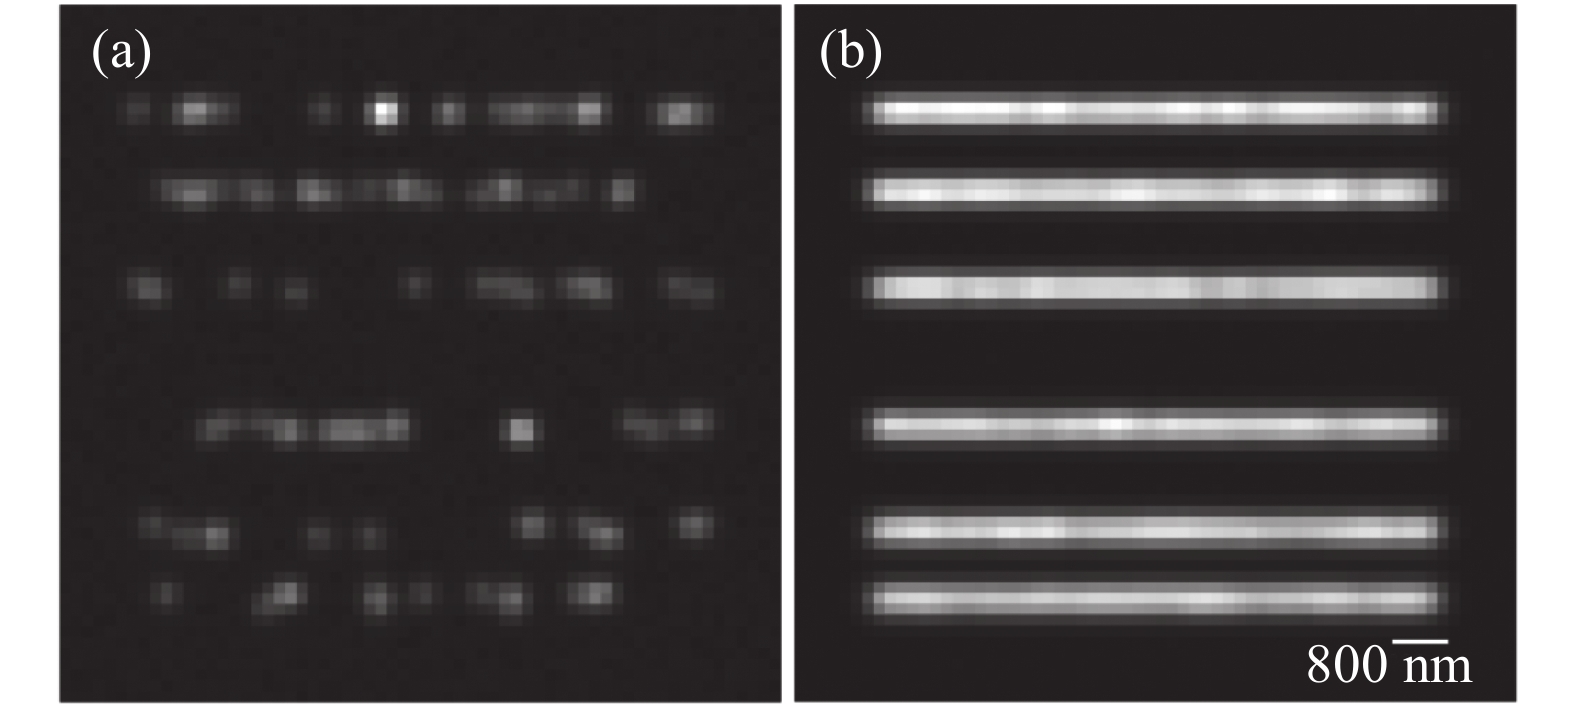 Images of fluorescent molecules by simulation generated. (a) A frame image; (b) Wide-field image by 500 frames accumulated